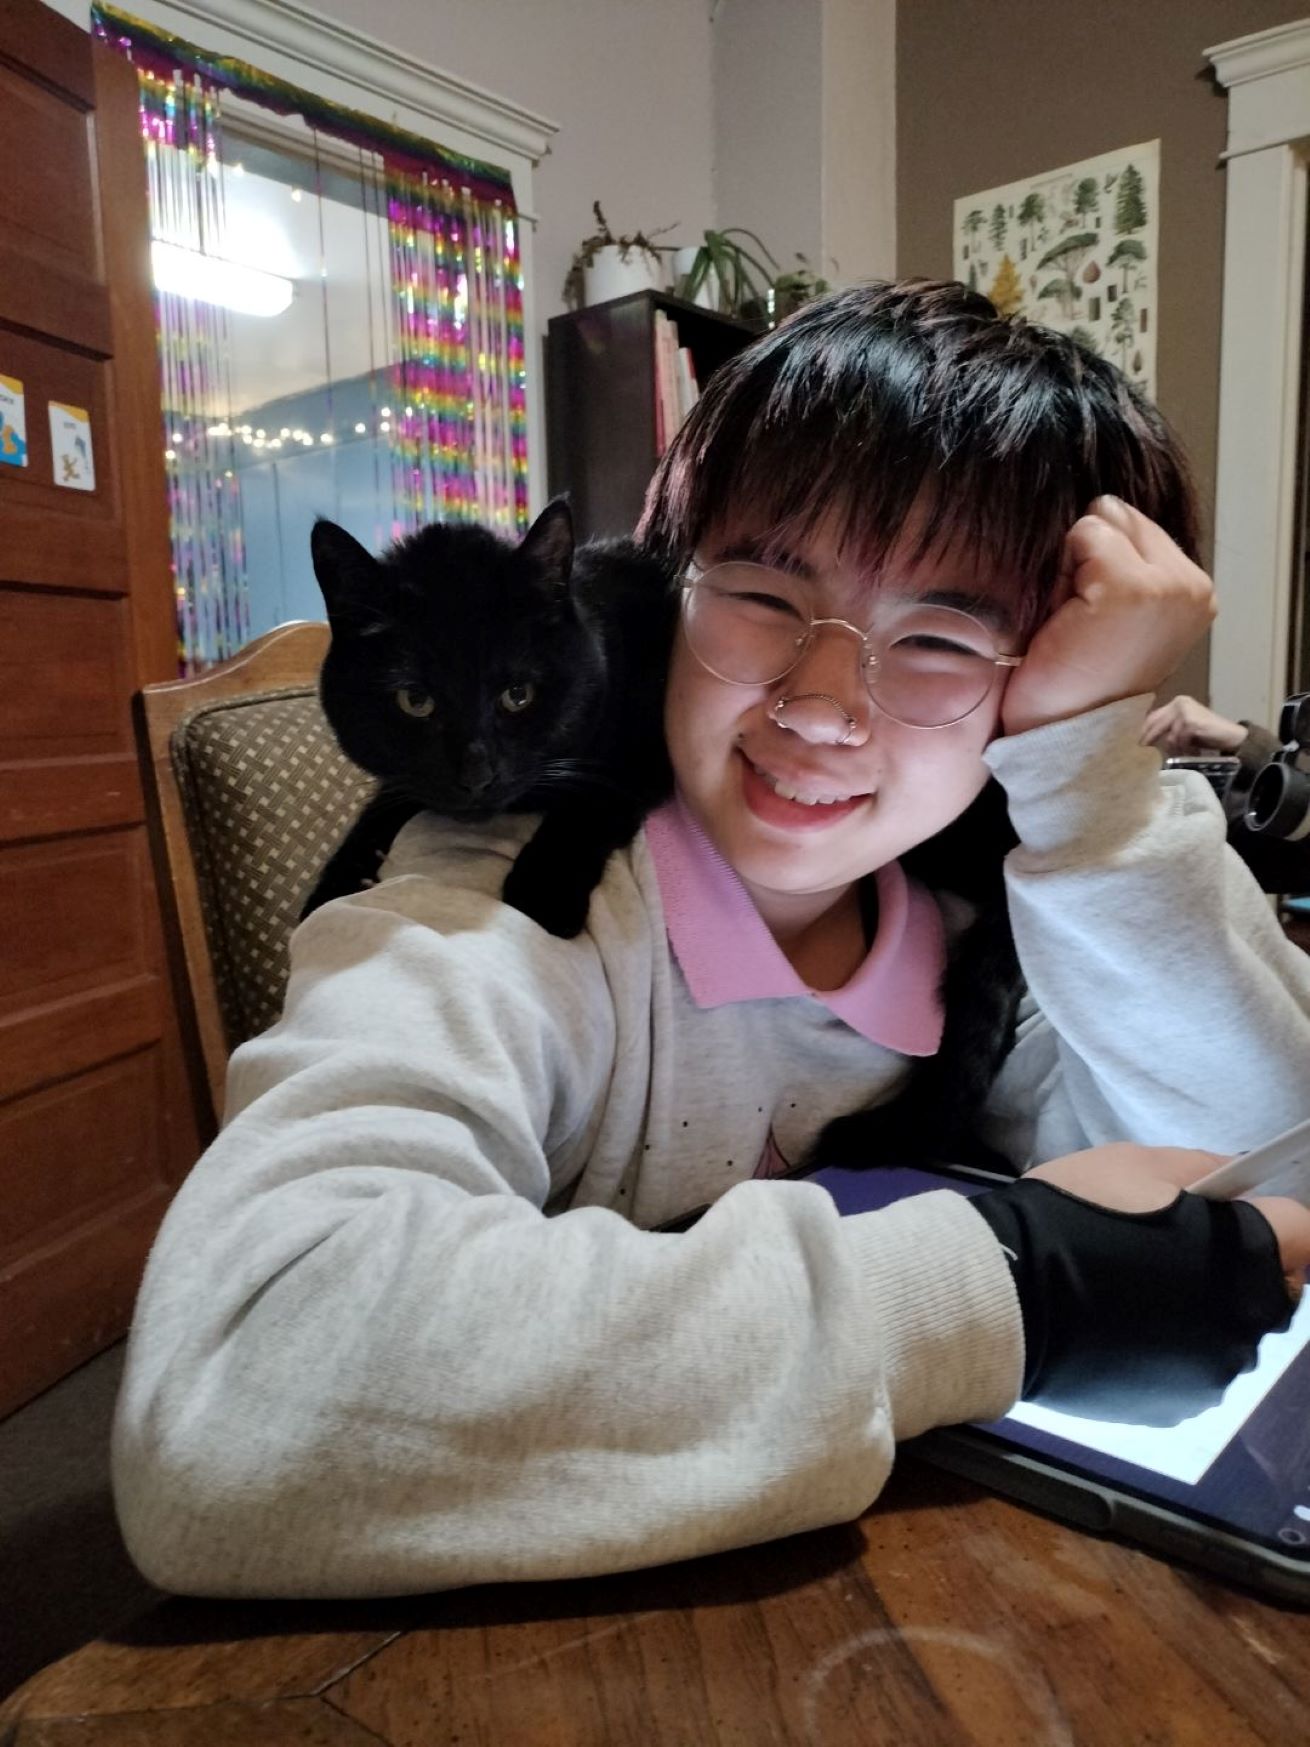 Alex wearing glasses and a white sweatshirt, smiling with black cat on right shoulder and head rested on left hand